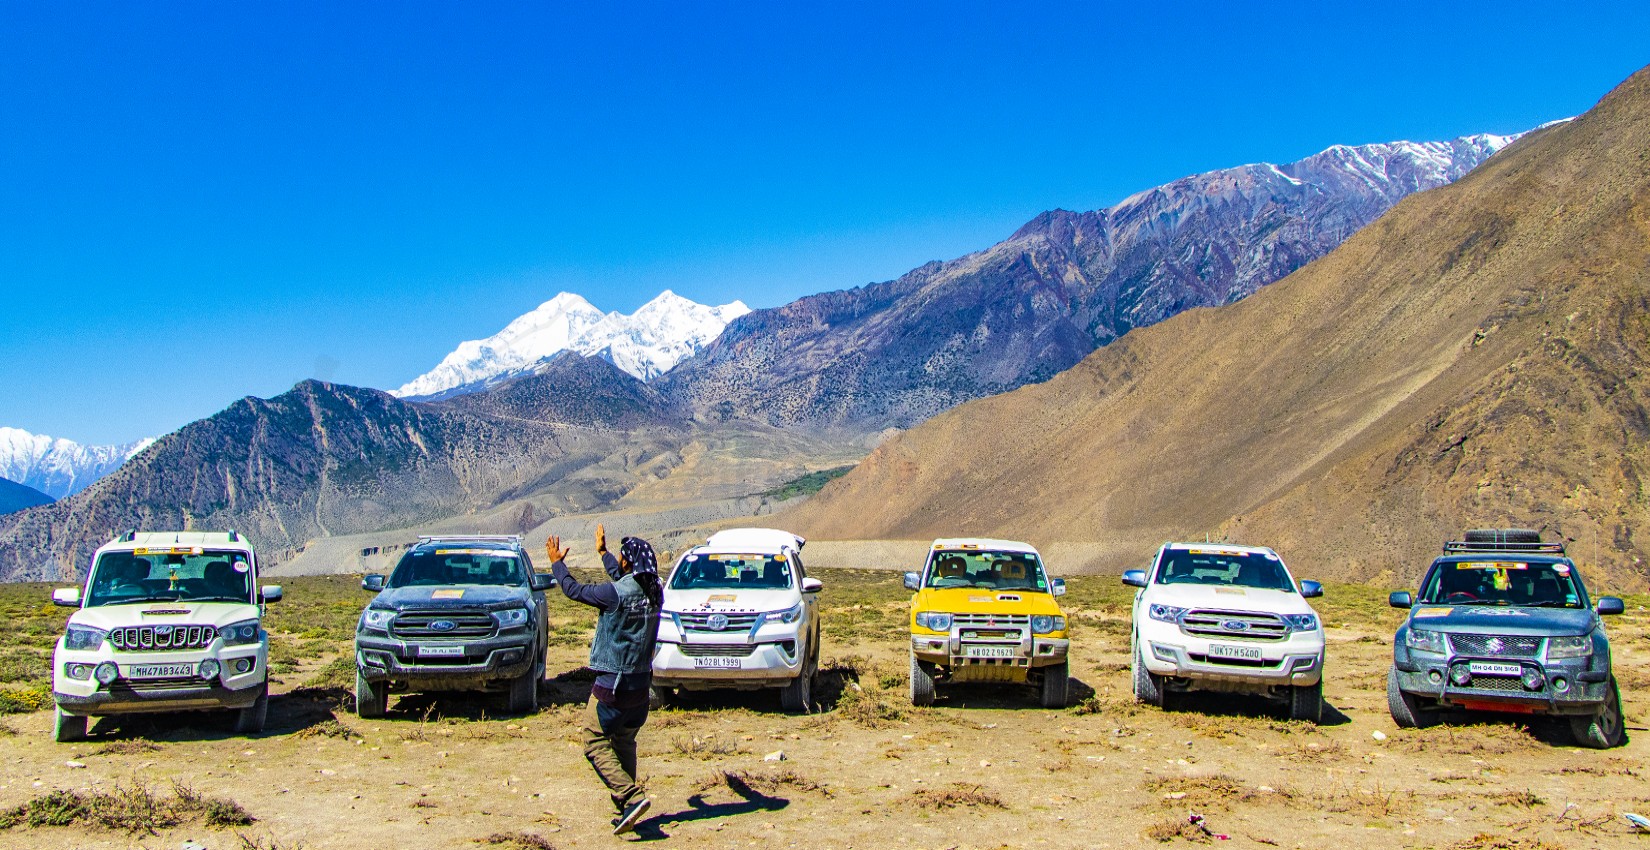 Upper Mustang Convoy with Mt. Dhaulagiri on the background